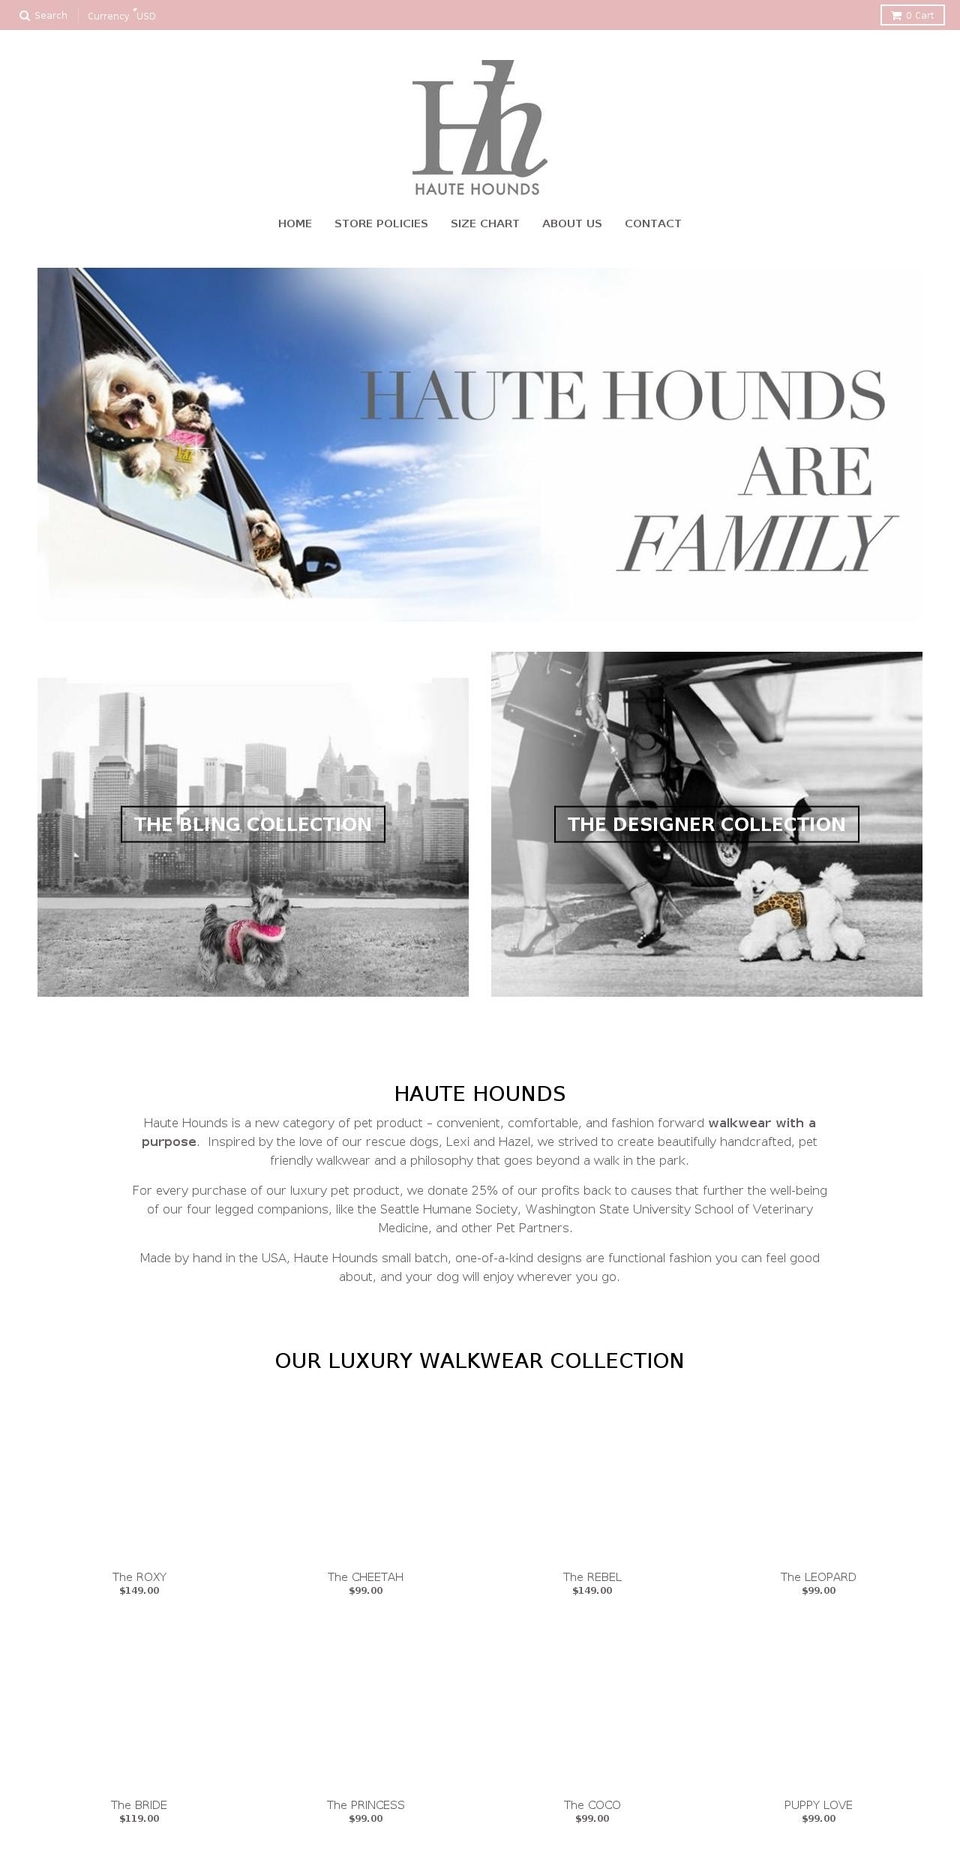 HAUTE HOUNDS NEW PRODUCT LIVE 4-24-18 Shopify theme site example hautehounds.dog